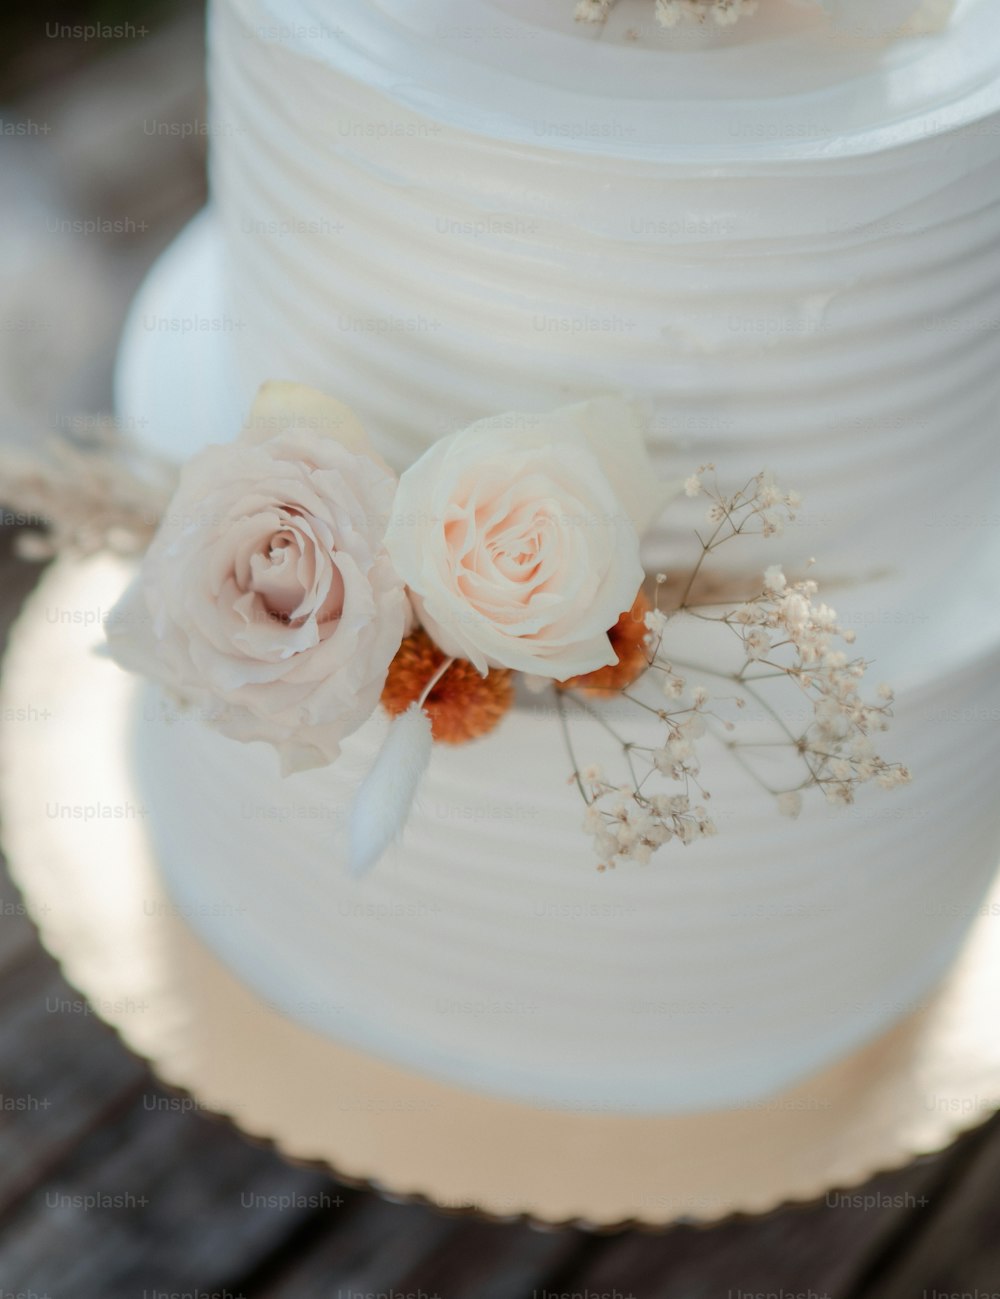 a close up of a wedding cake with flowers on it